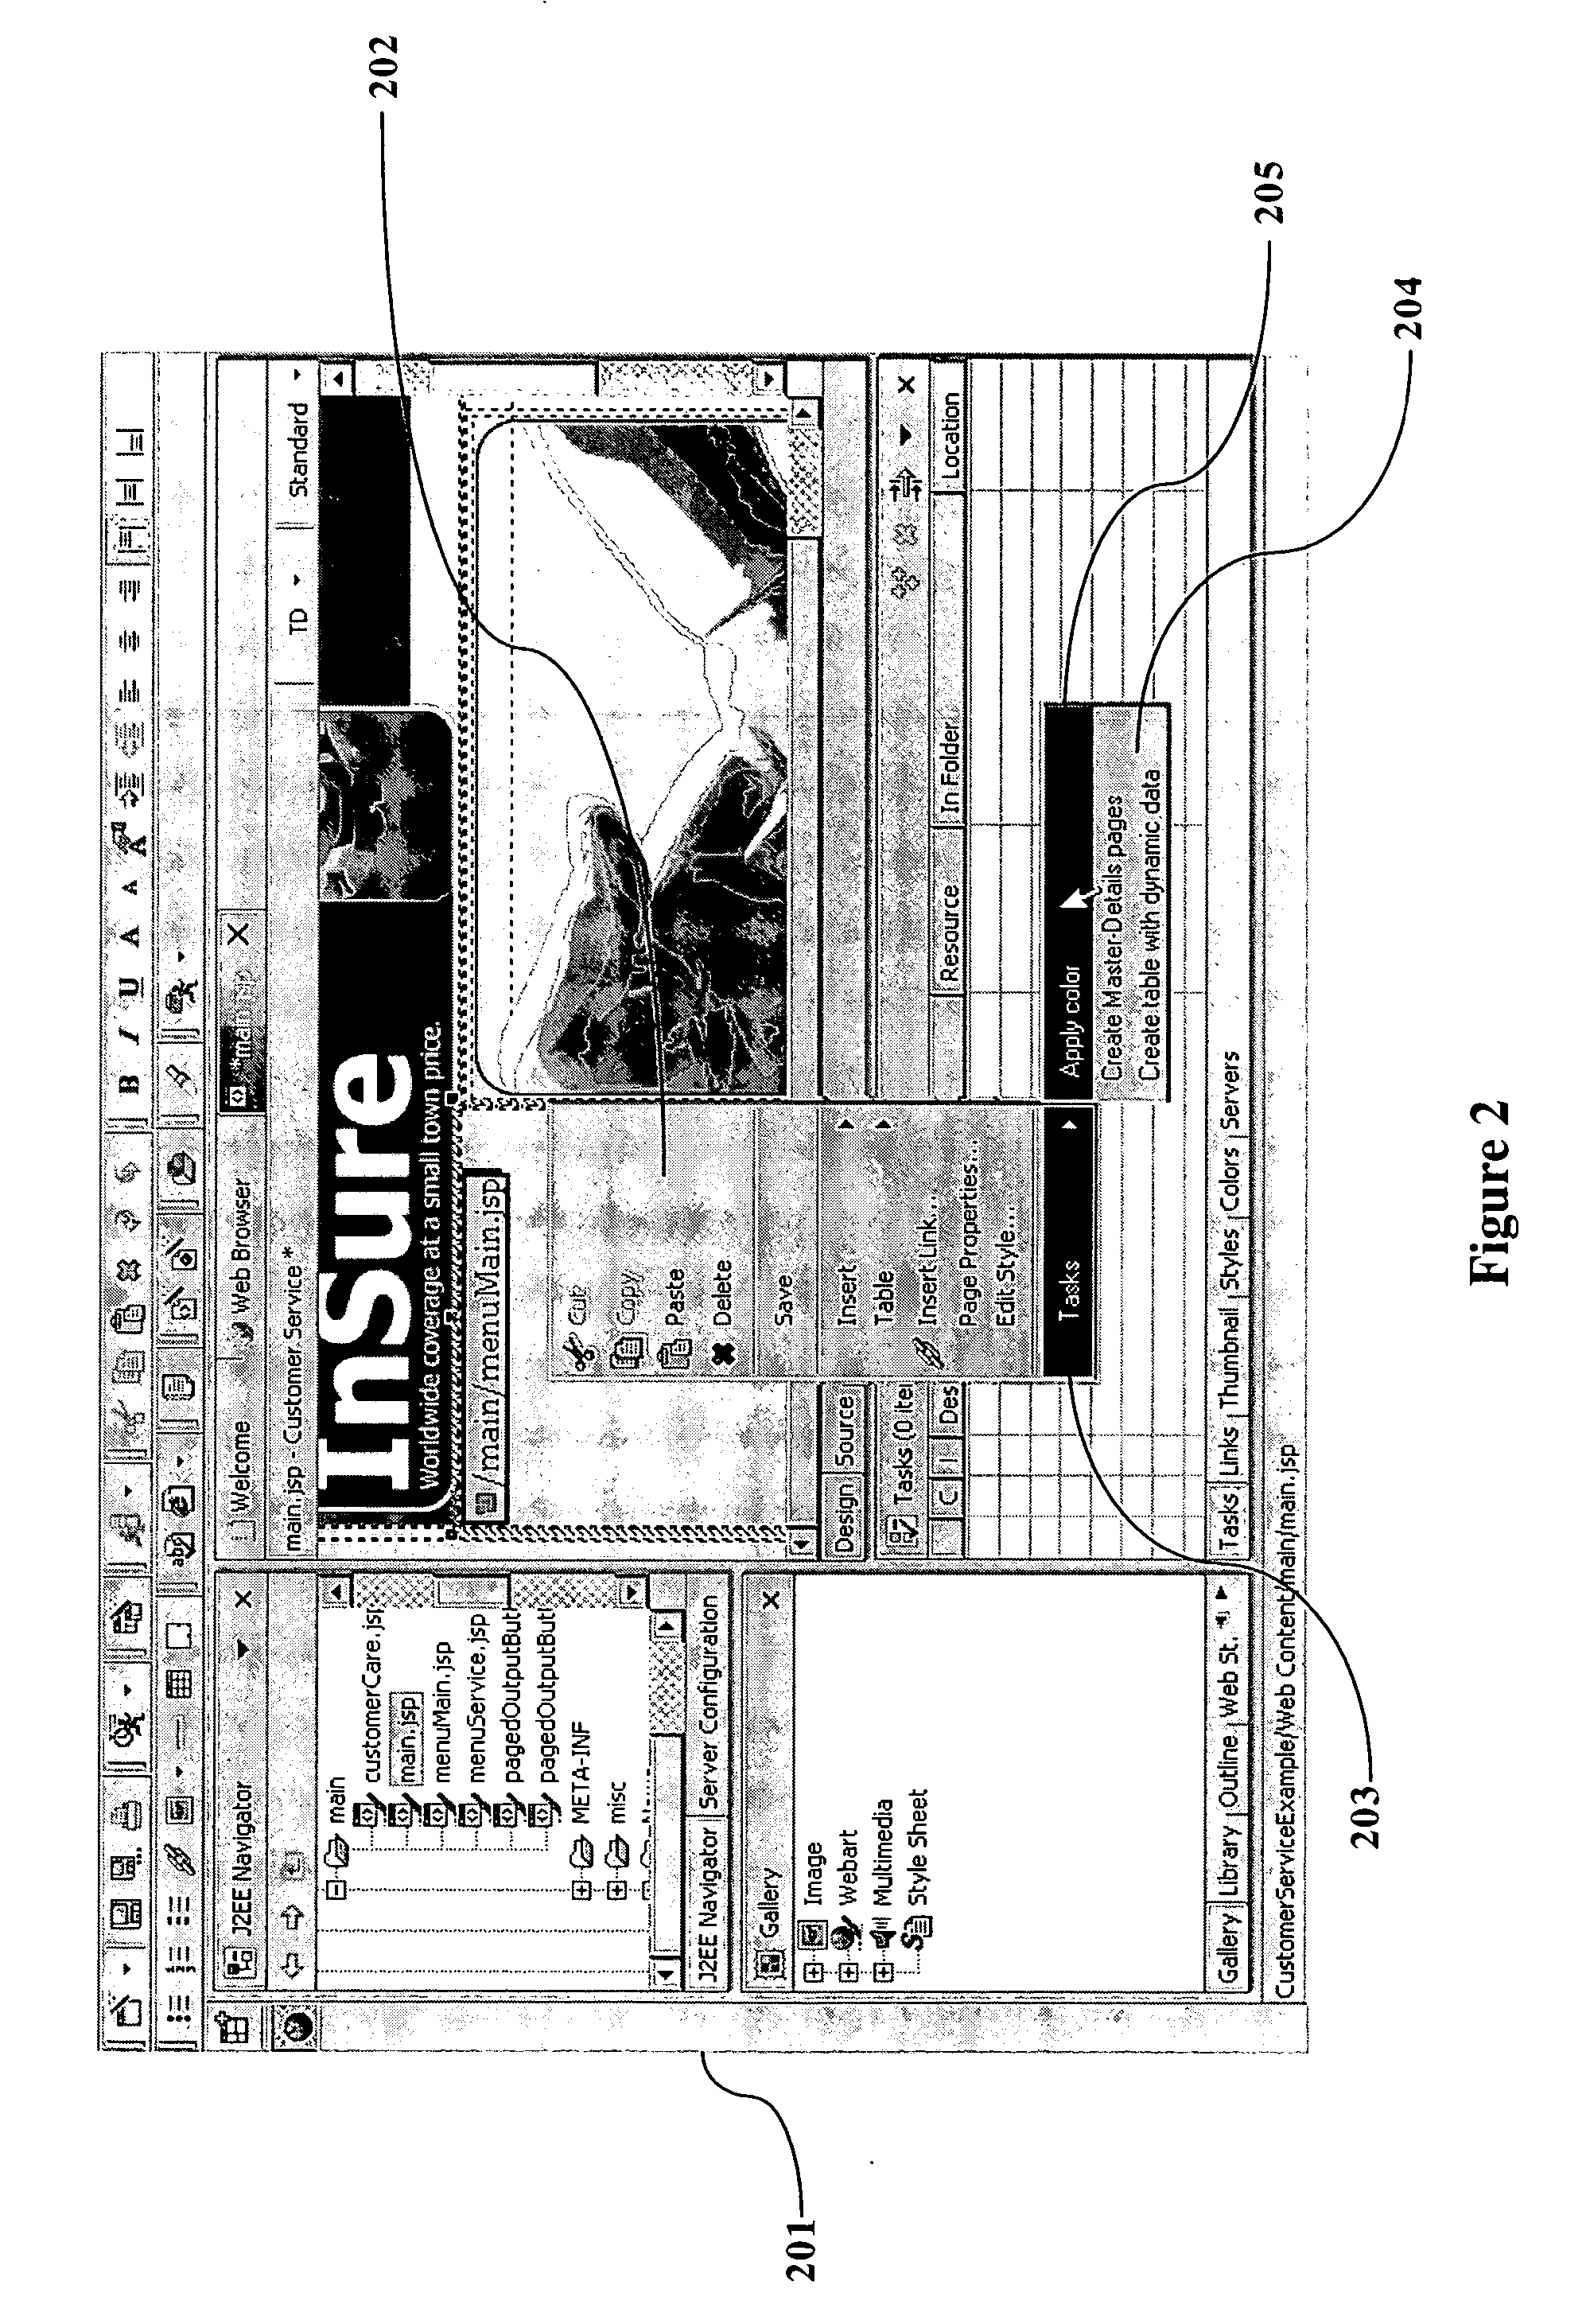 Method, system and computer program for providing interactive assistance in a computer application program